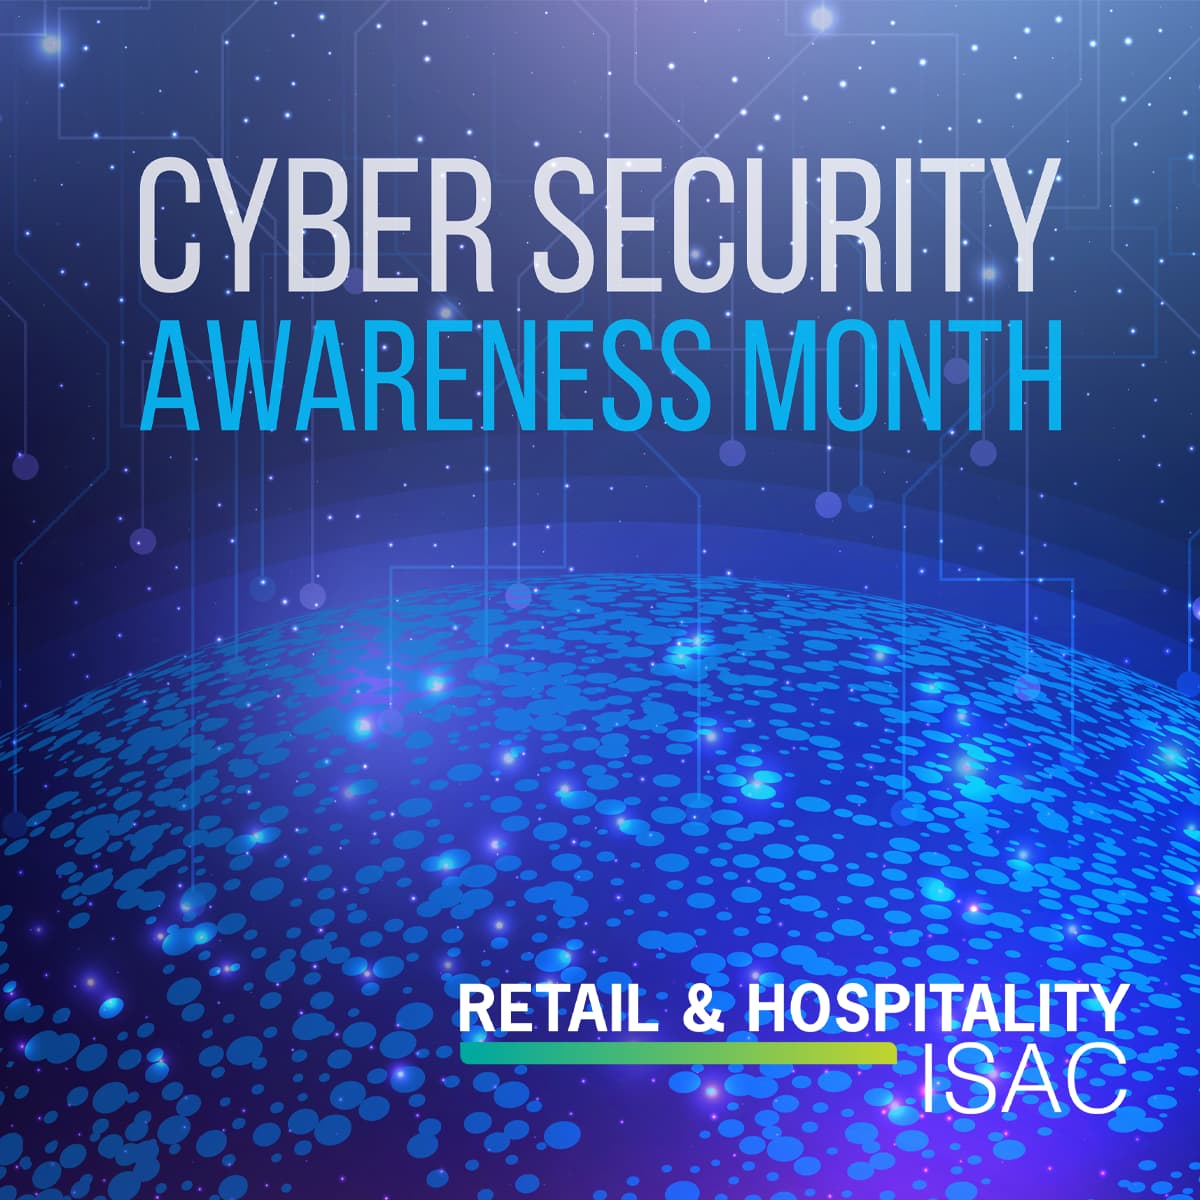 4 Cybersecurity Awareness Month Initiatives for Your Company